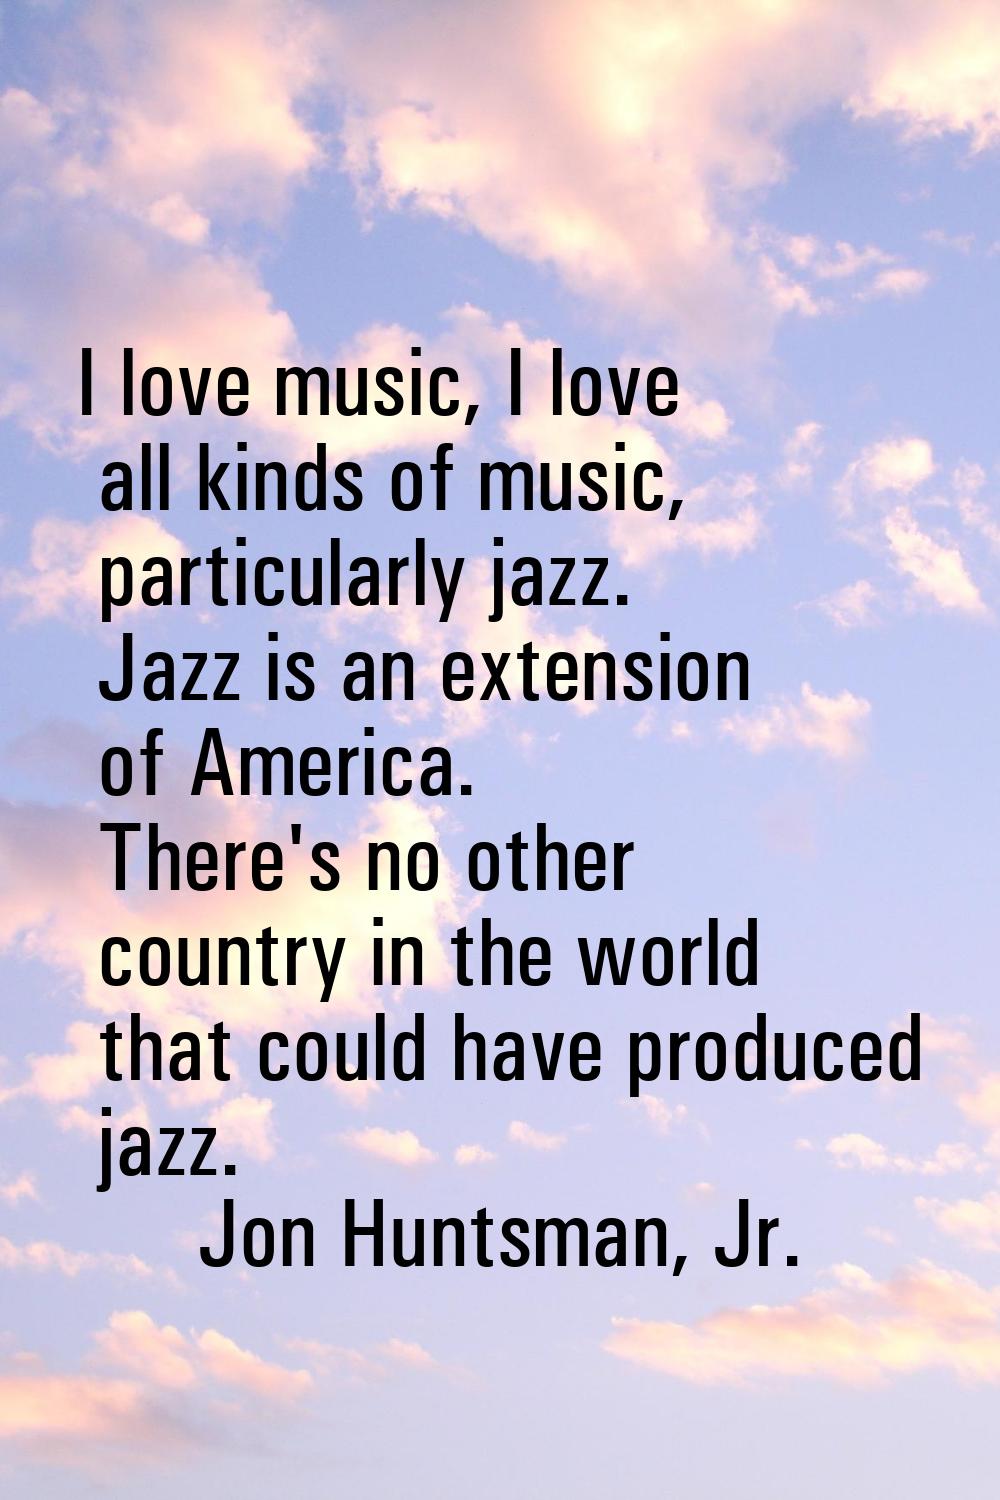 I love music, I love all kinds of music, particularly jazz. Jazz is an extension of America. There'